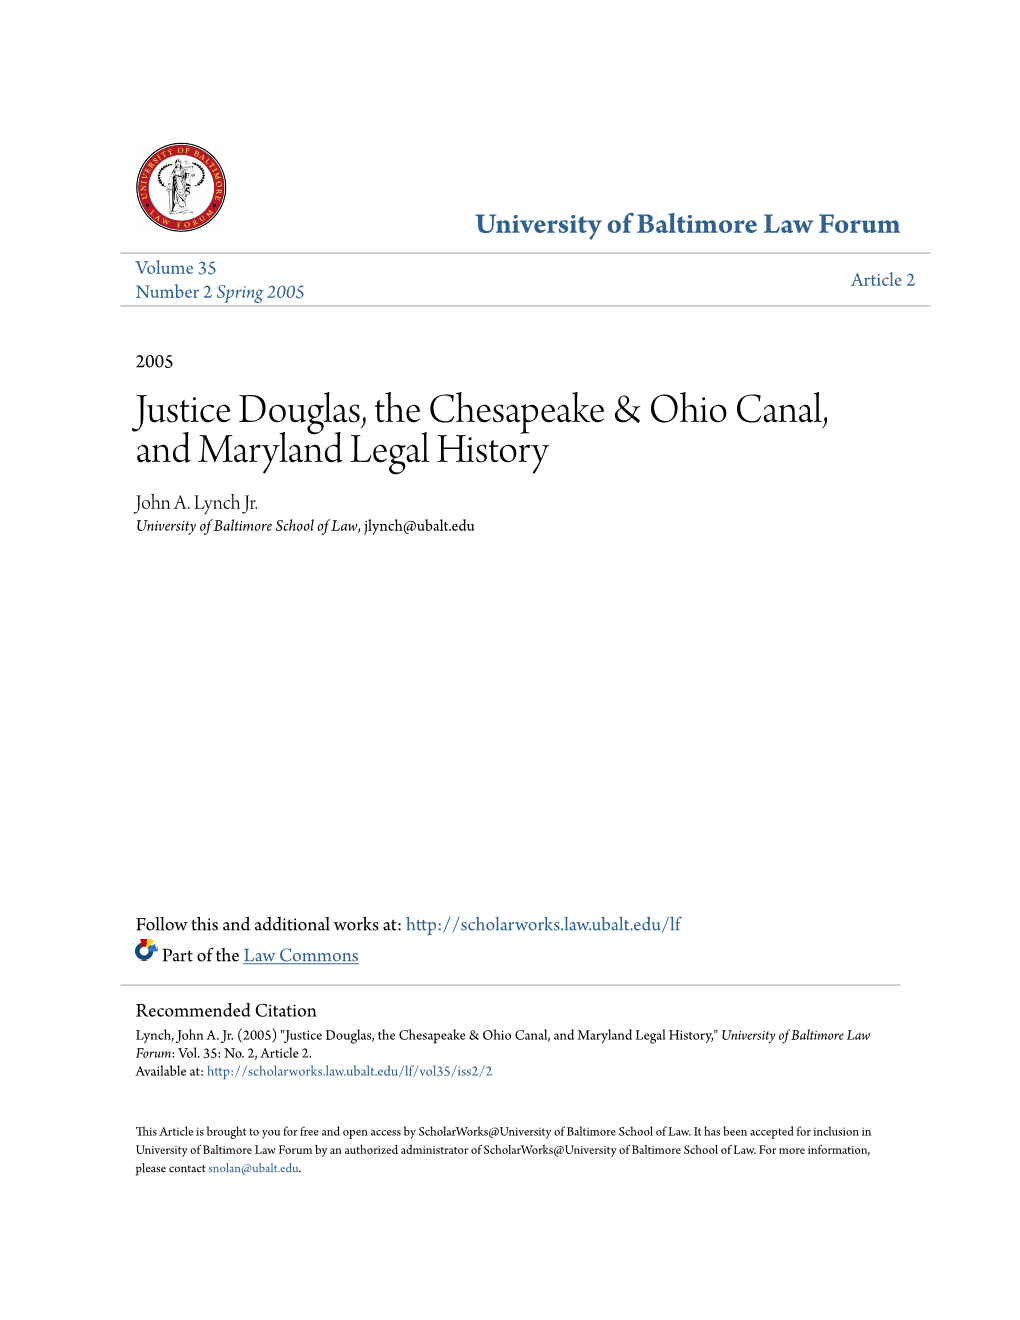 Justice Douglas, the Chesapeake & Ohio Canal, and Maryland Legal History